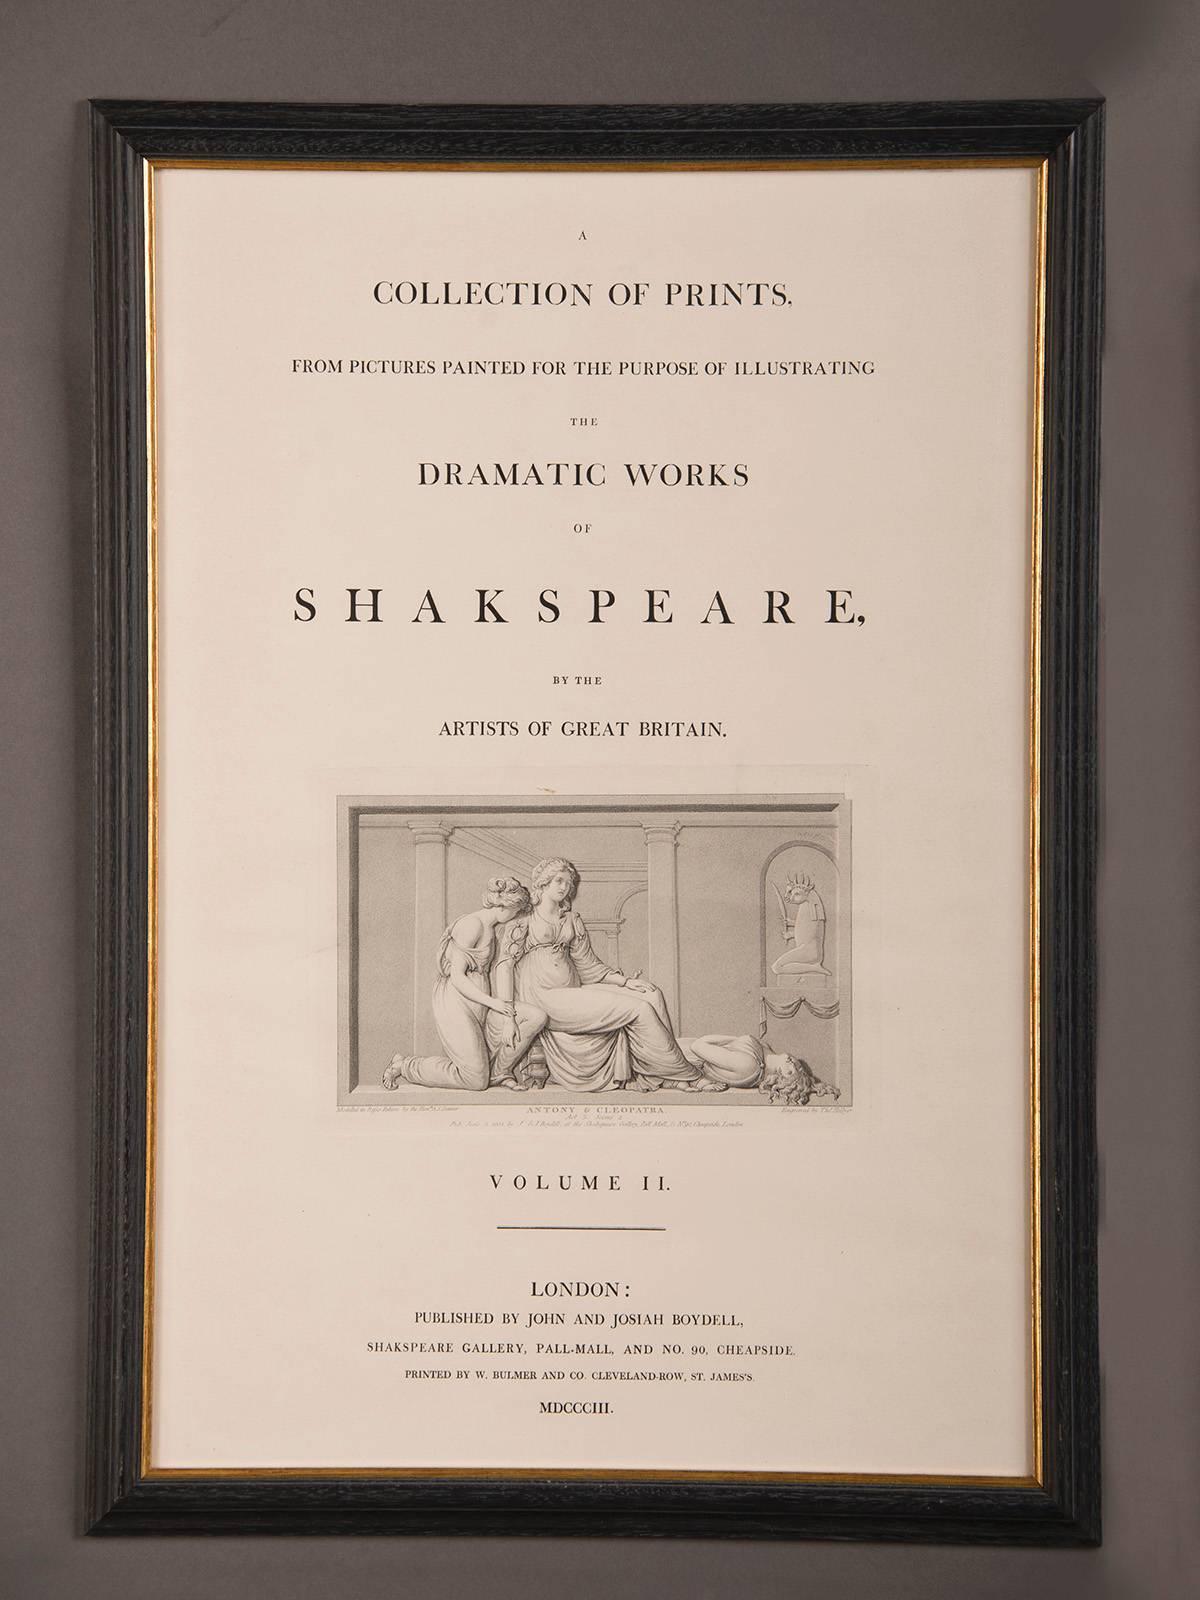 Receive our new selections direct from 1stdibs by email each week. Please click Follow Dealer below and see them first!

A set of five antique engravings of Shakespeare's plays, England 1803 (MDCCCIII). This set of engravings were taken from the